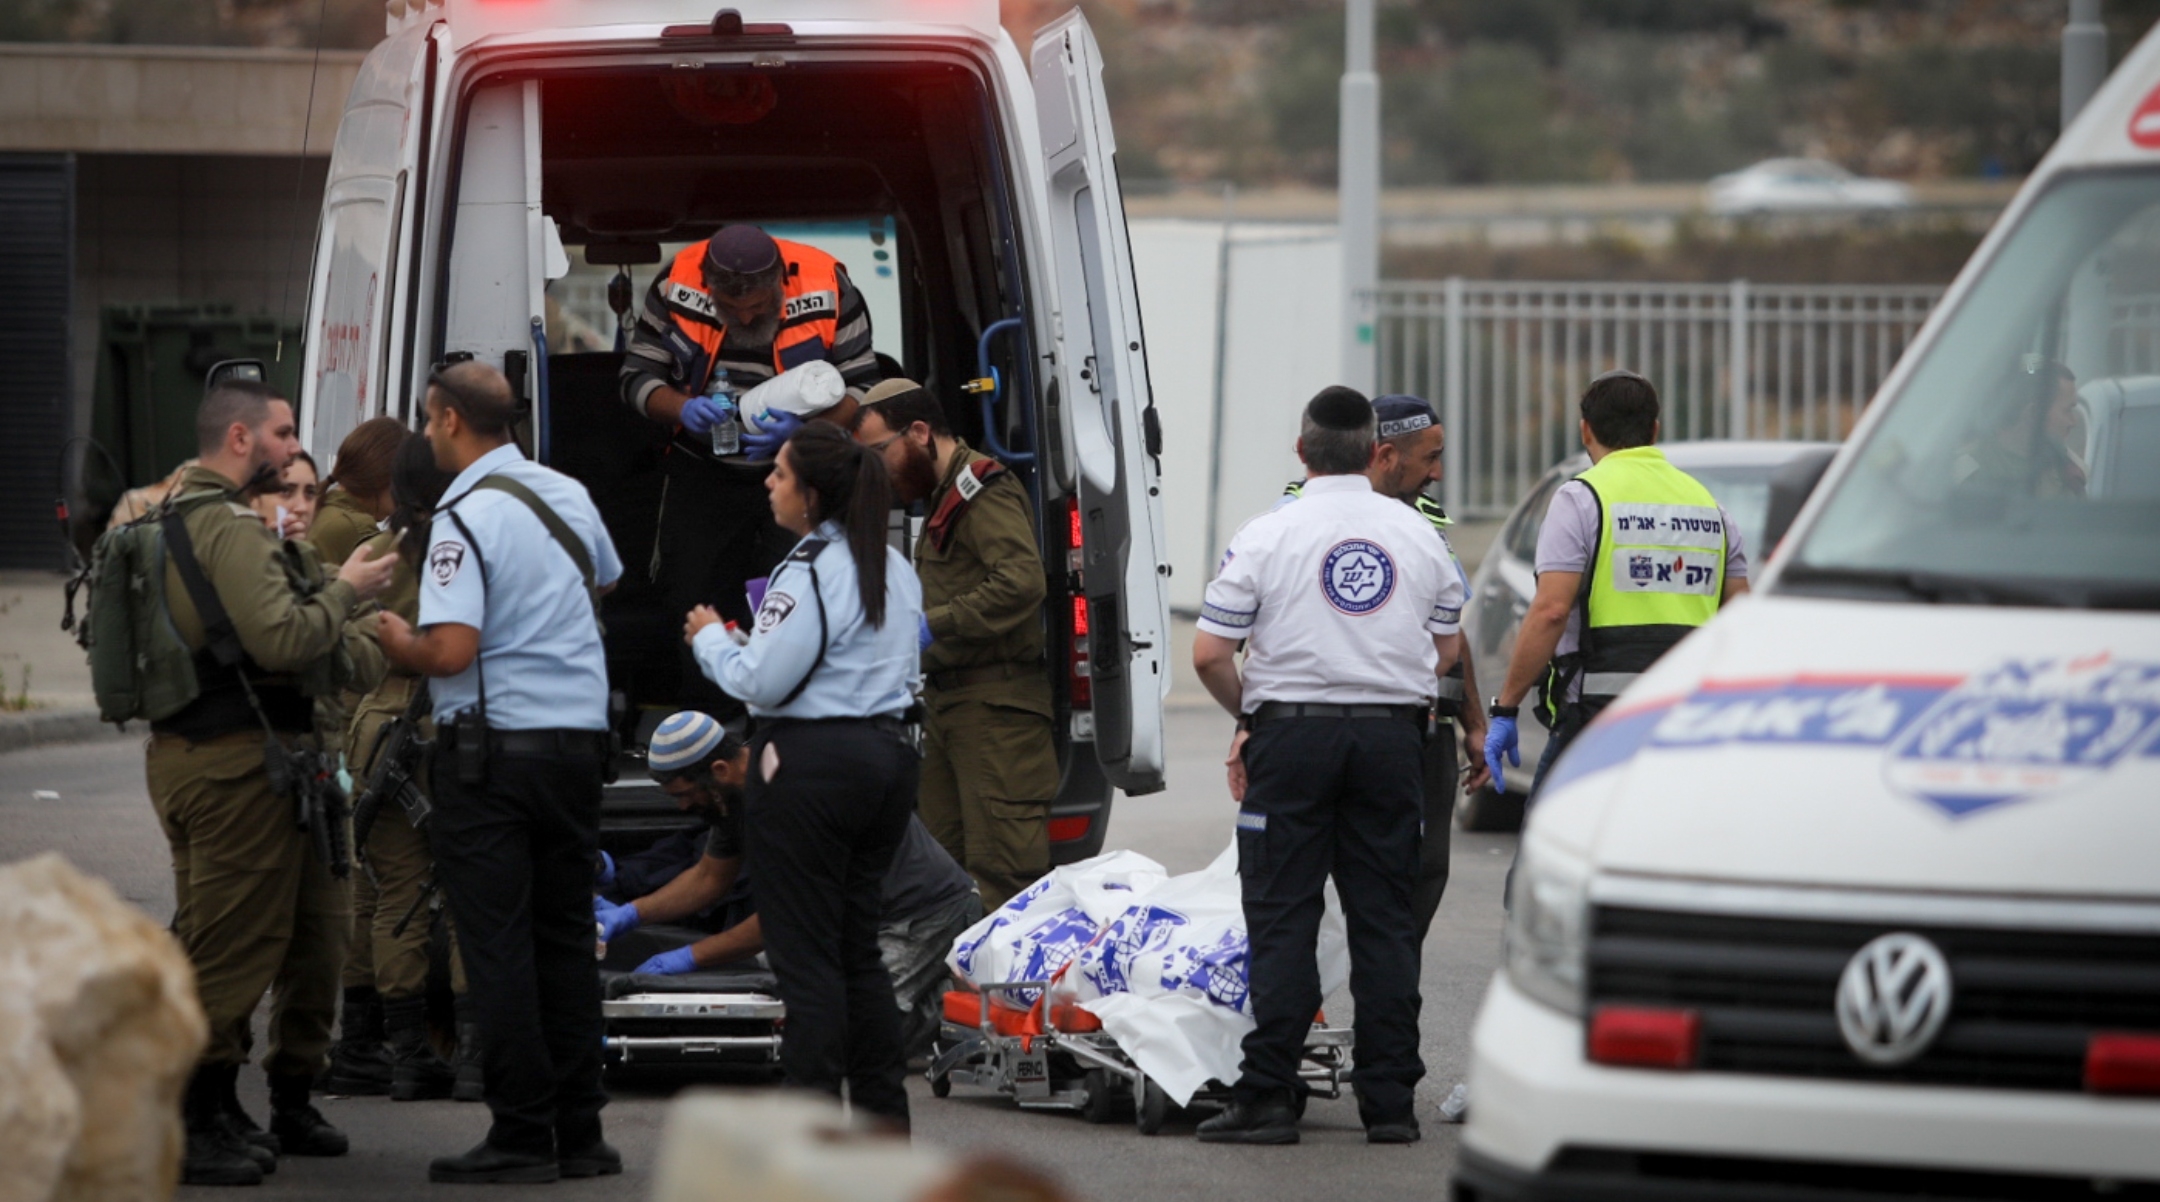 Medics remove the body of a man murdered in a stabbing attack earlier, outside Ariel, in the West Bank, on November 15, 2022. (Flash90)